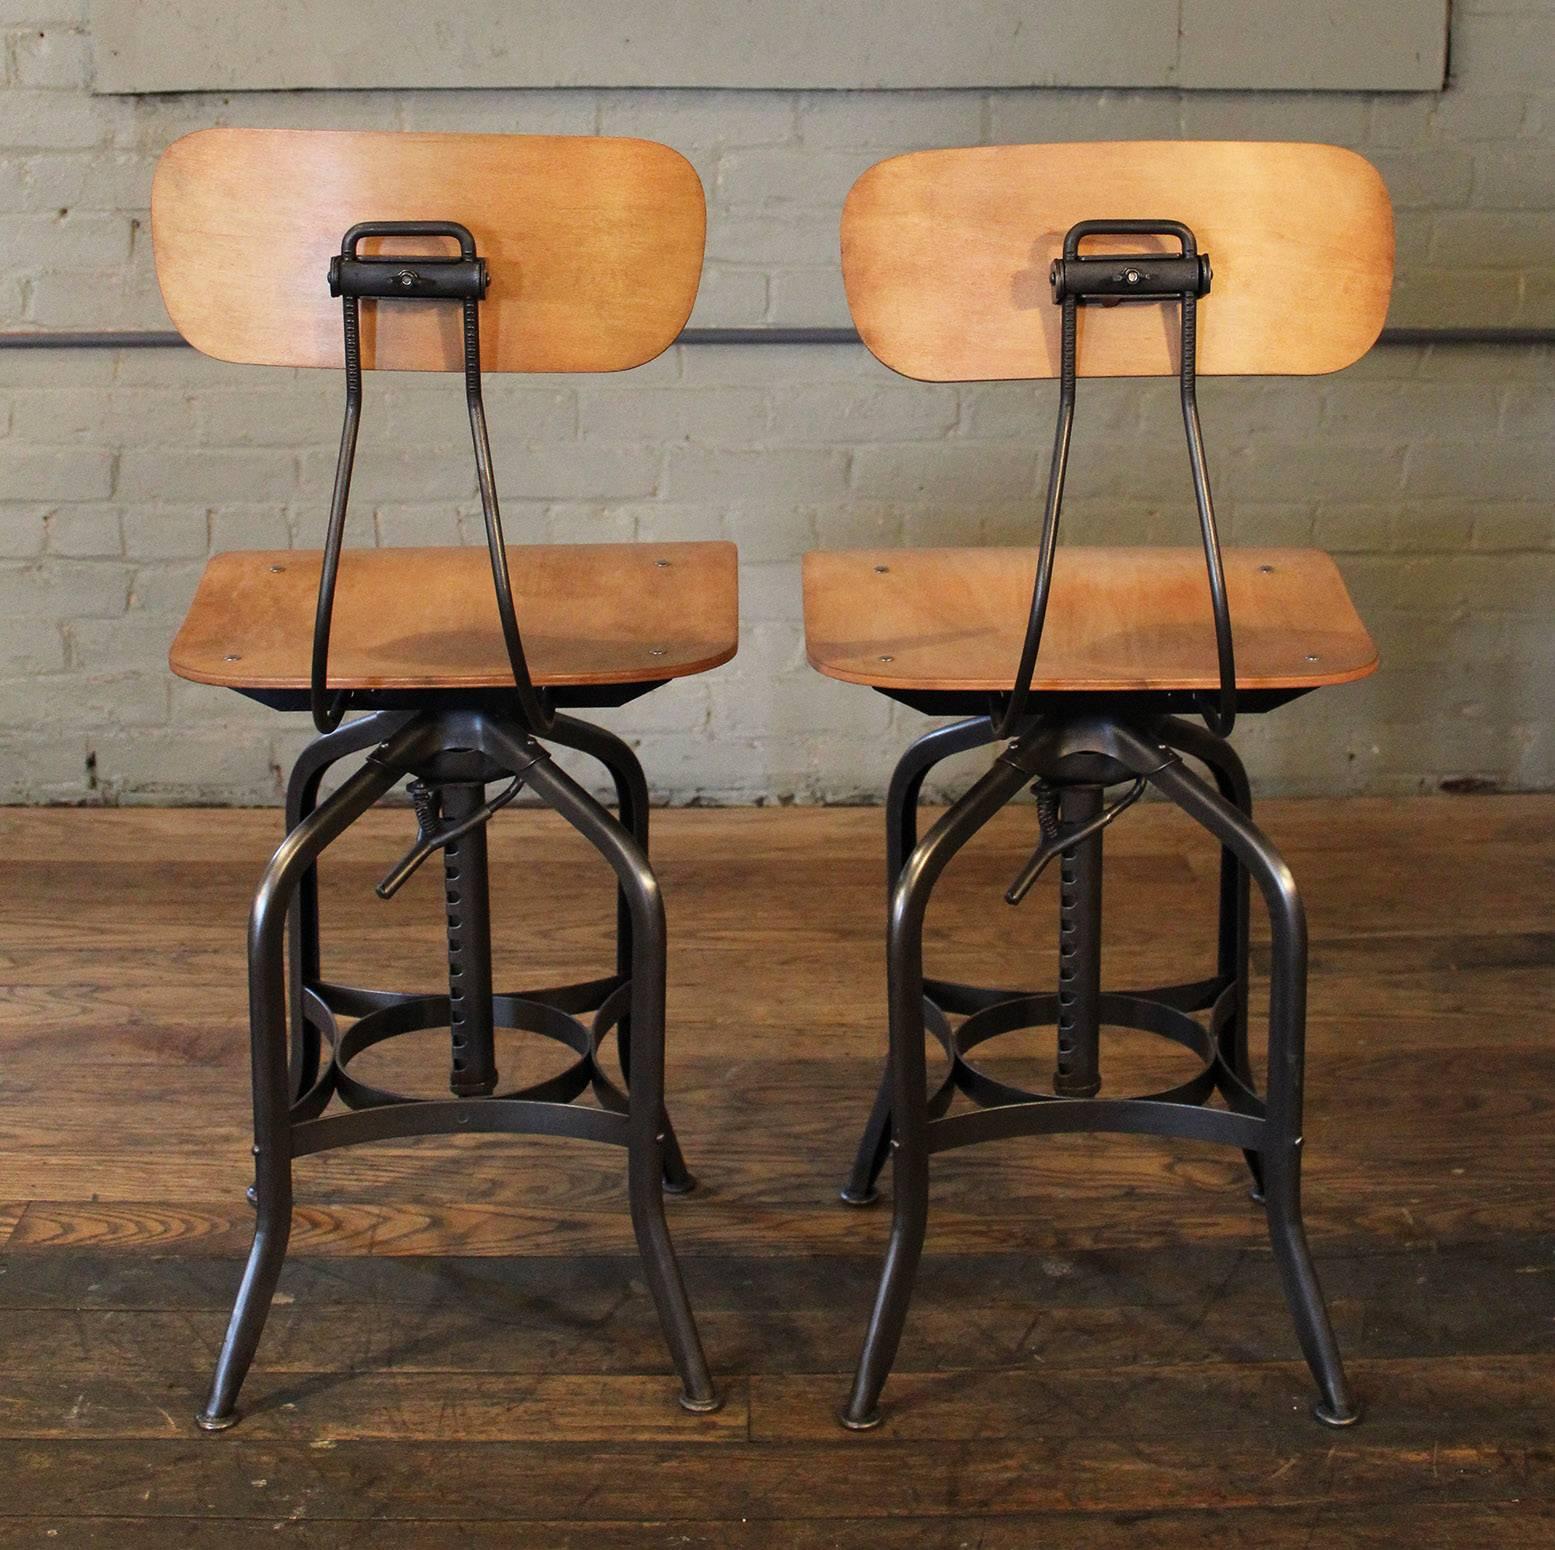 Pair of bent plywood and steel, metal vintage Industrial toledo adjustable swivel bar stools, chairs. Overall height adjusts from 36" - 42 1/2". Seat height adjusts from 22" - 29 1/2", seat width measures 16", depth measures